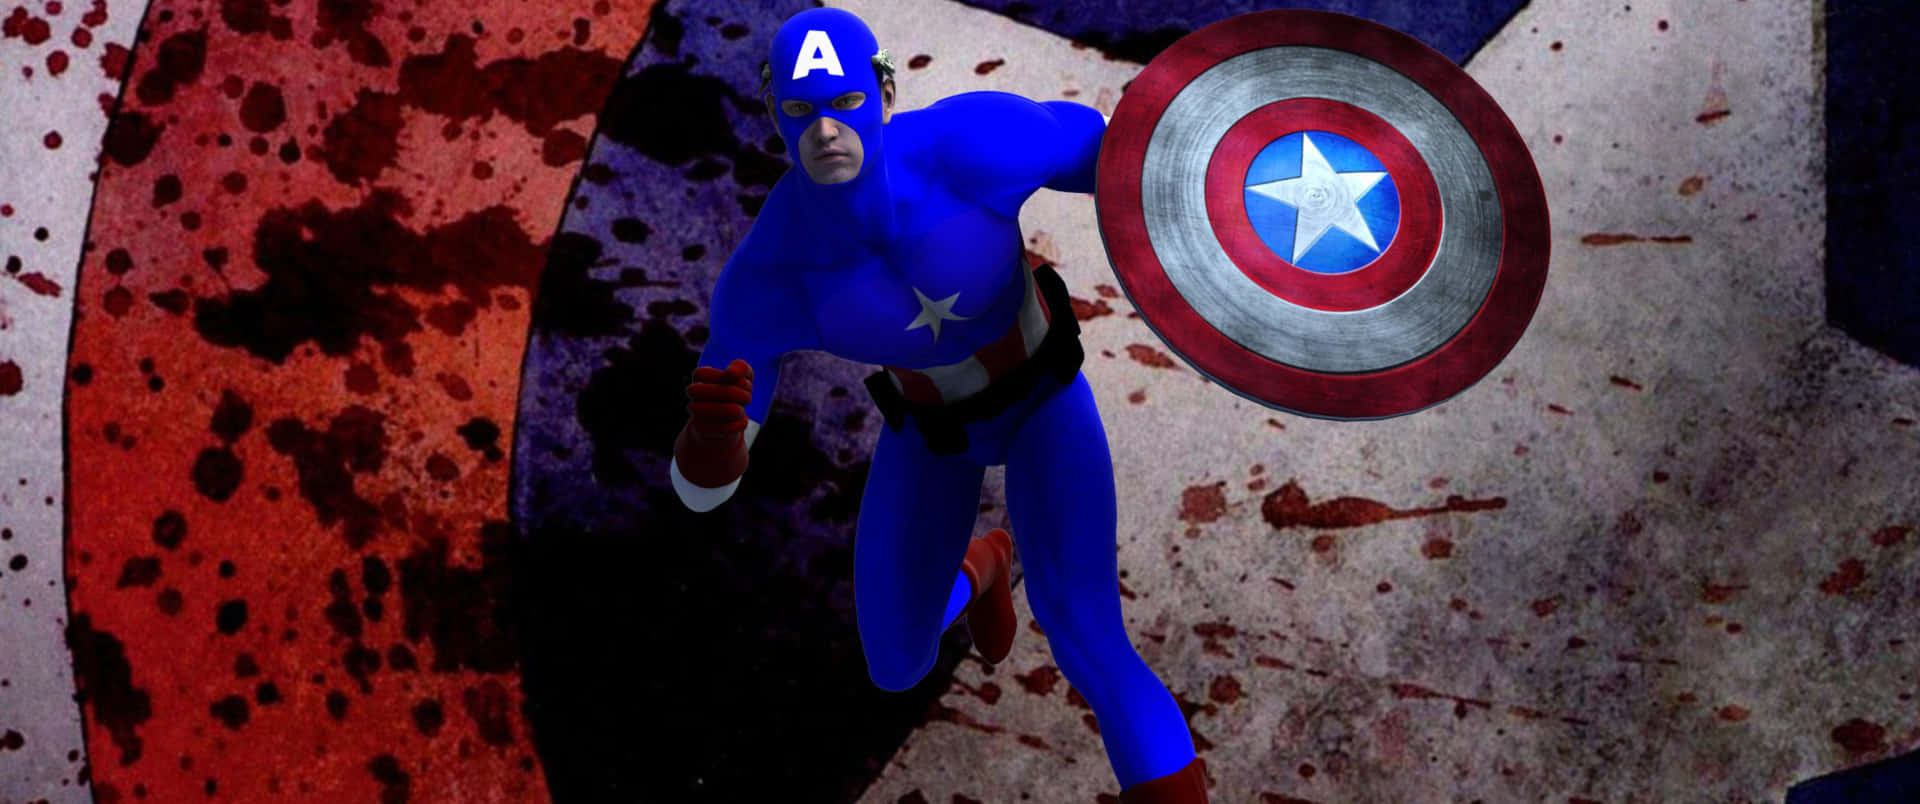 "Captain America defending the Stars and Stripes"